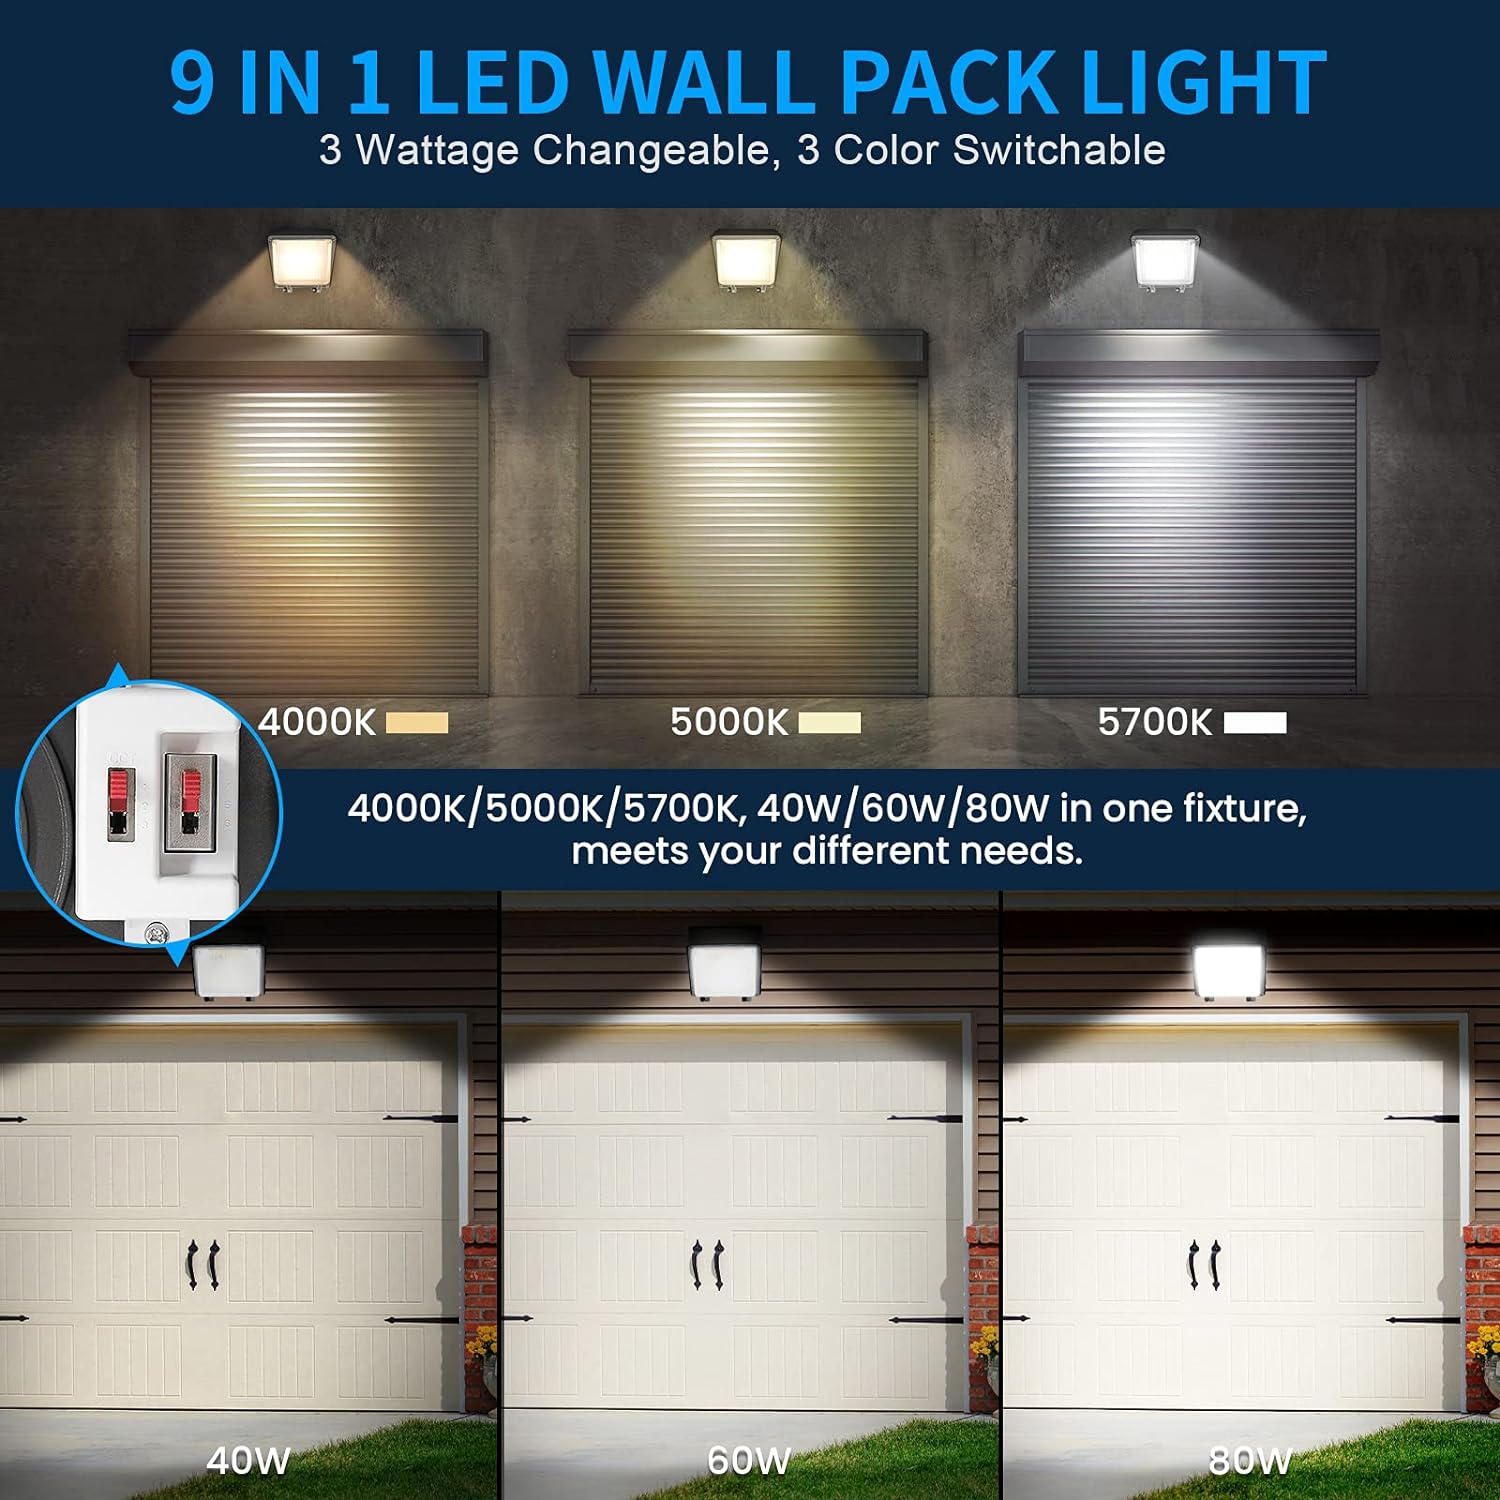 AKK 80W LED Wall Pack 60W 40W Tunable, 3 Color Switchable 12000LM (Eqv. 400W MH), IP65 Outdoor Wall Pack LED Light with Photocell, 100-277V LED Wall Pack Light for Parking Lots,Warehouses, ETL Listed